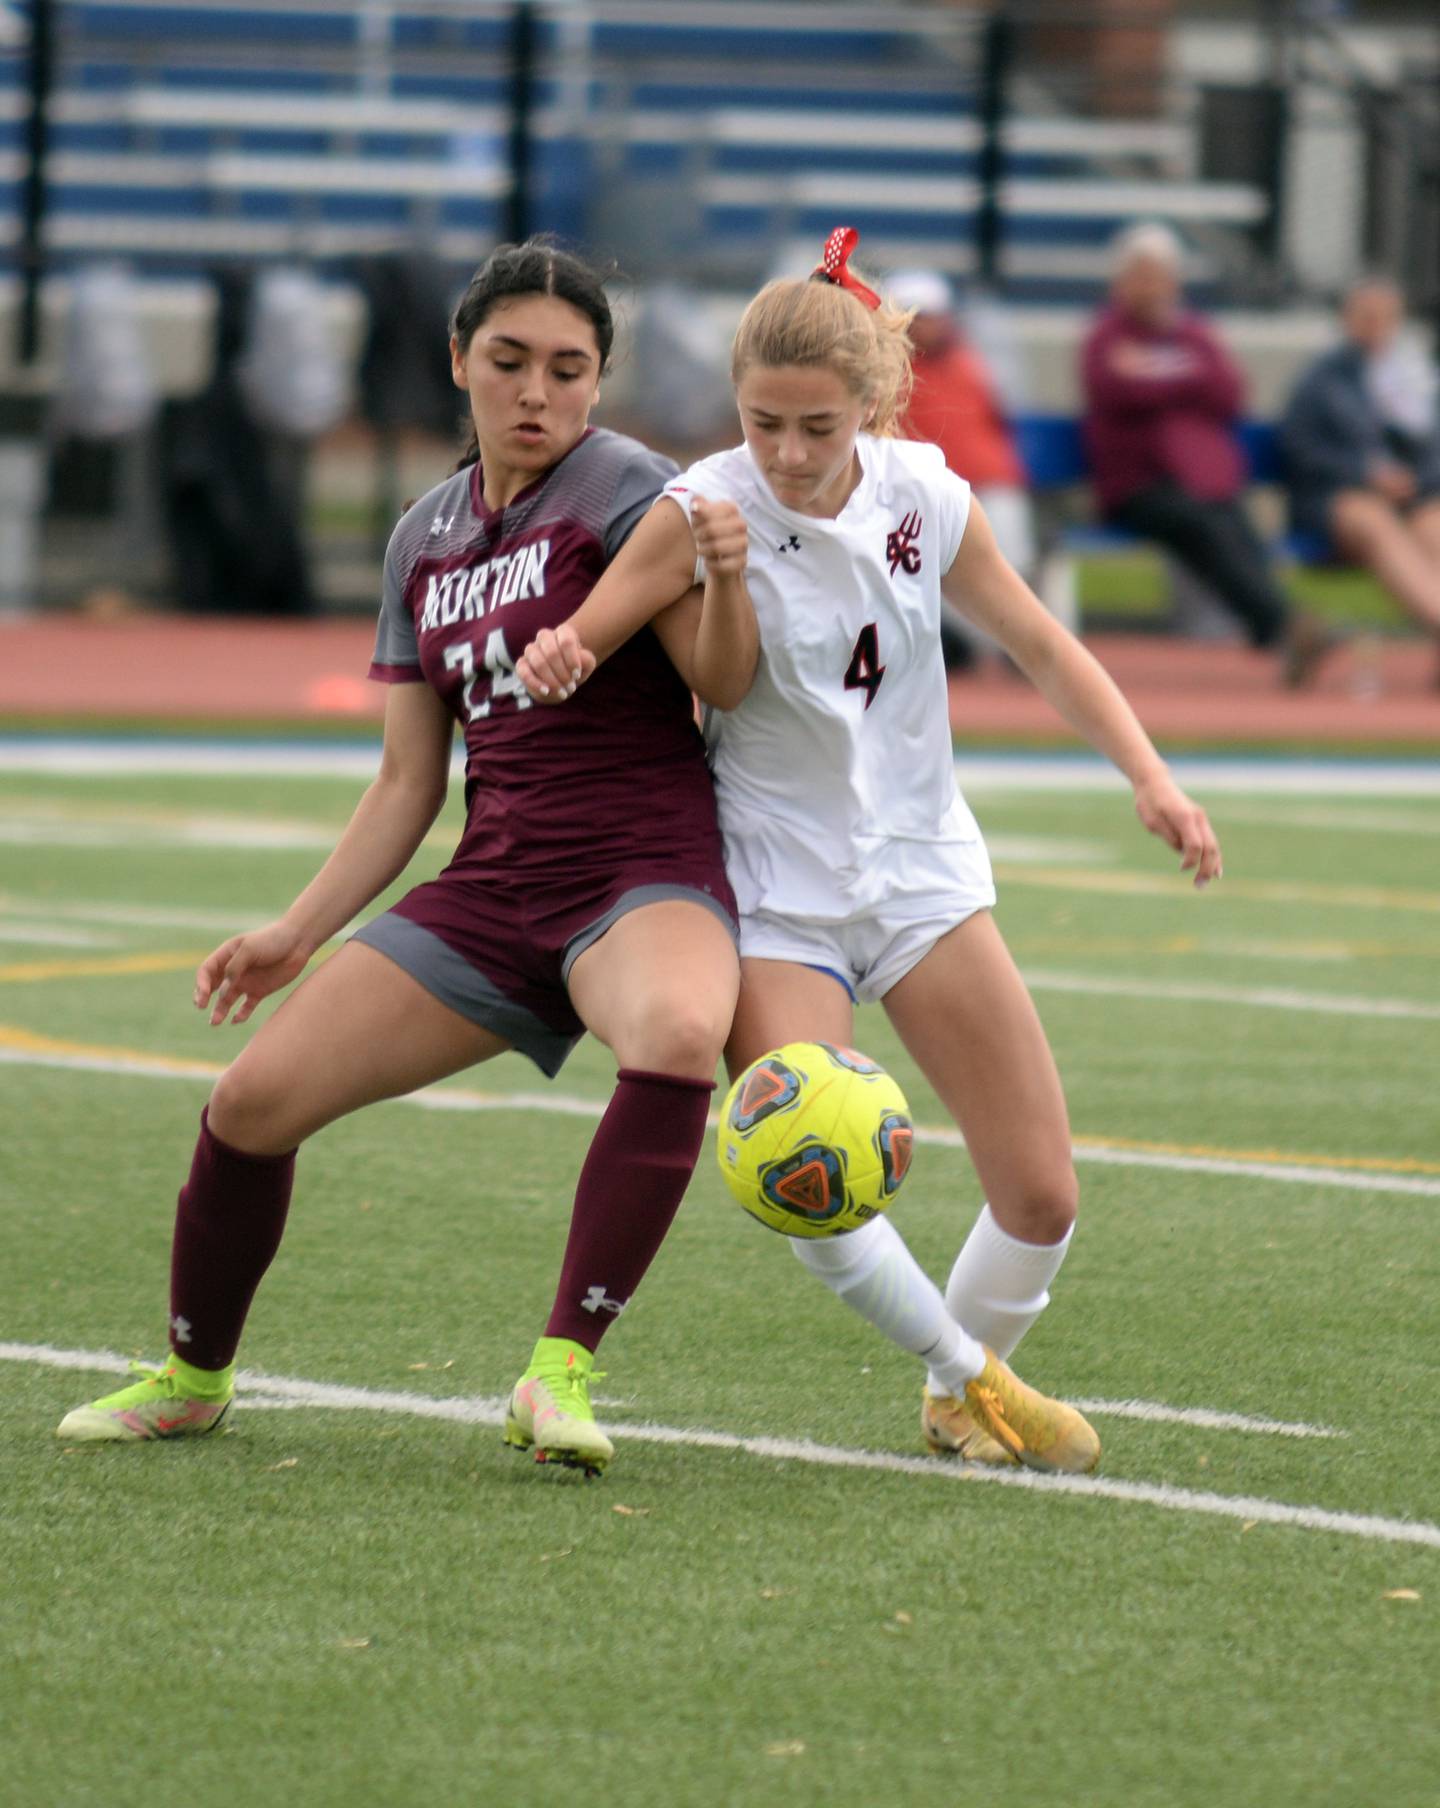 Morton West's Aaliyah Leanos competes for the ball against Hinsdale Central's Carter Knotts during the regional final game held Saturday May 21, 2022.